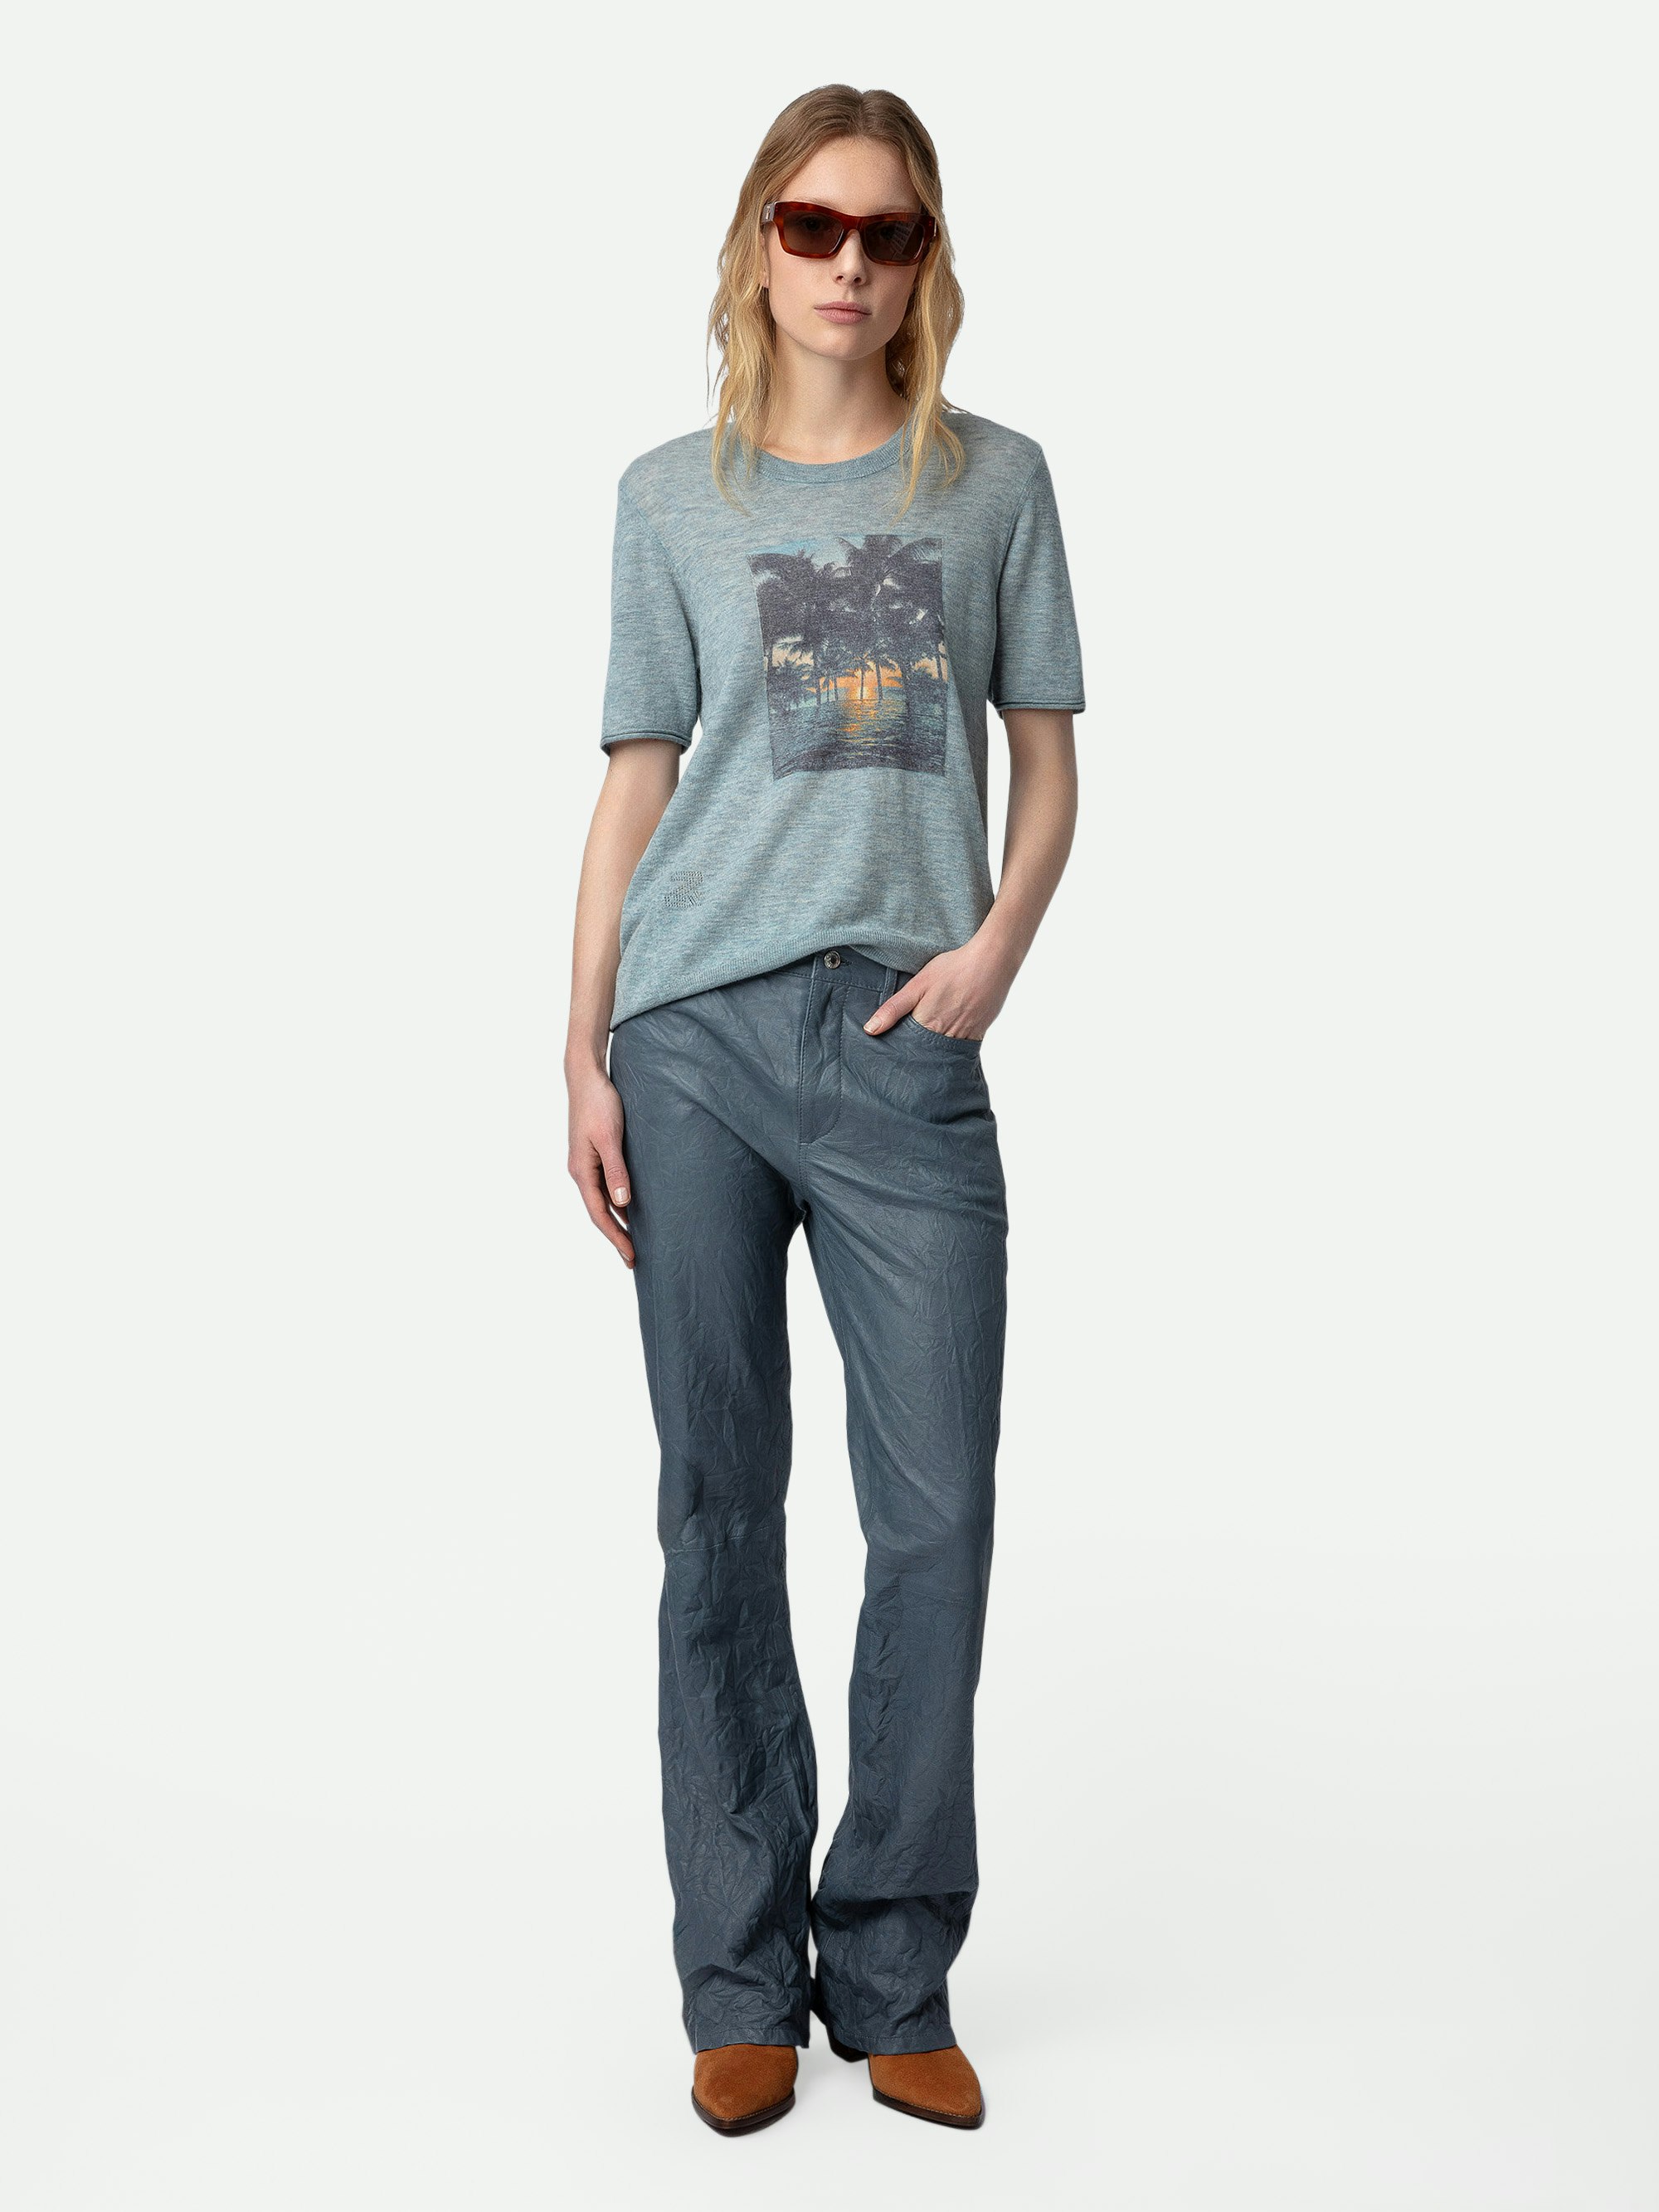 Ida Photoprint 100% Cashmere Jumper - Sky blue feather 100% cashmere jumper with short sleeves and Palmier photoprint.